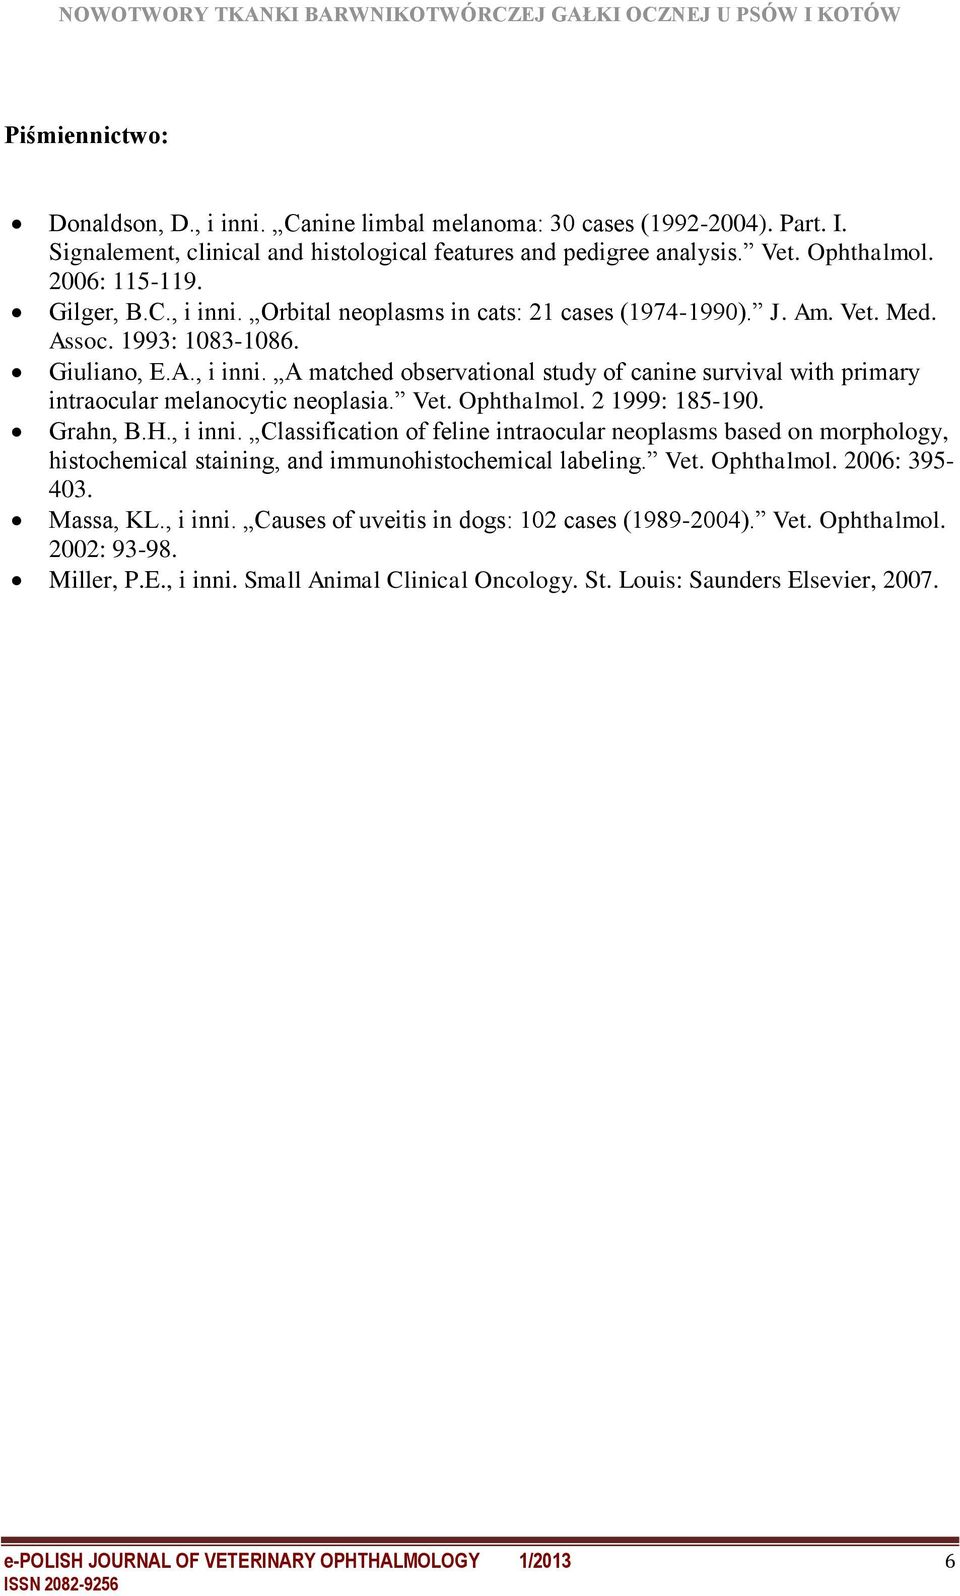 Vet. Ophthalmol. 2 1999: 185-190. Grahn, B.H., i inni. Classification of feline intraocular neoplasms based on morphology, histochemical staining, and immunohistochemical labeling. Vet. Ophthalmol. 2006: 395-403.